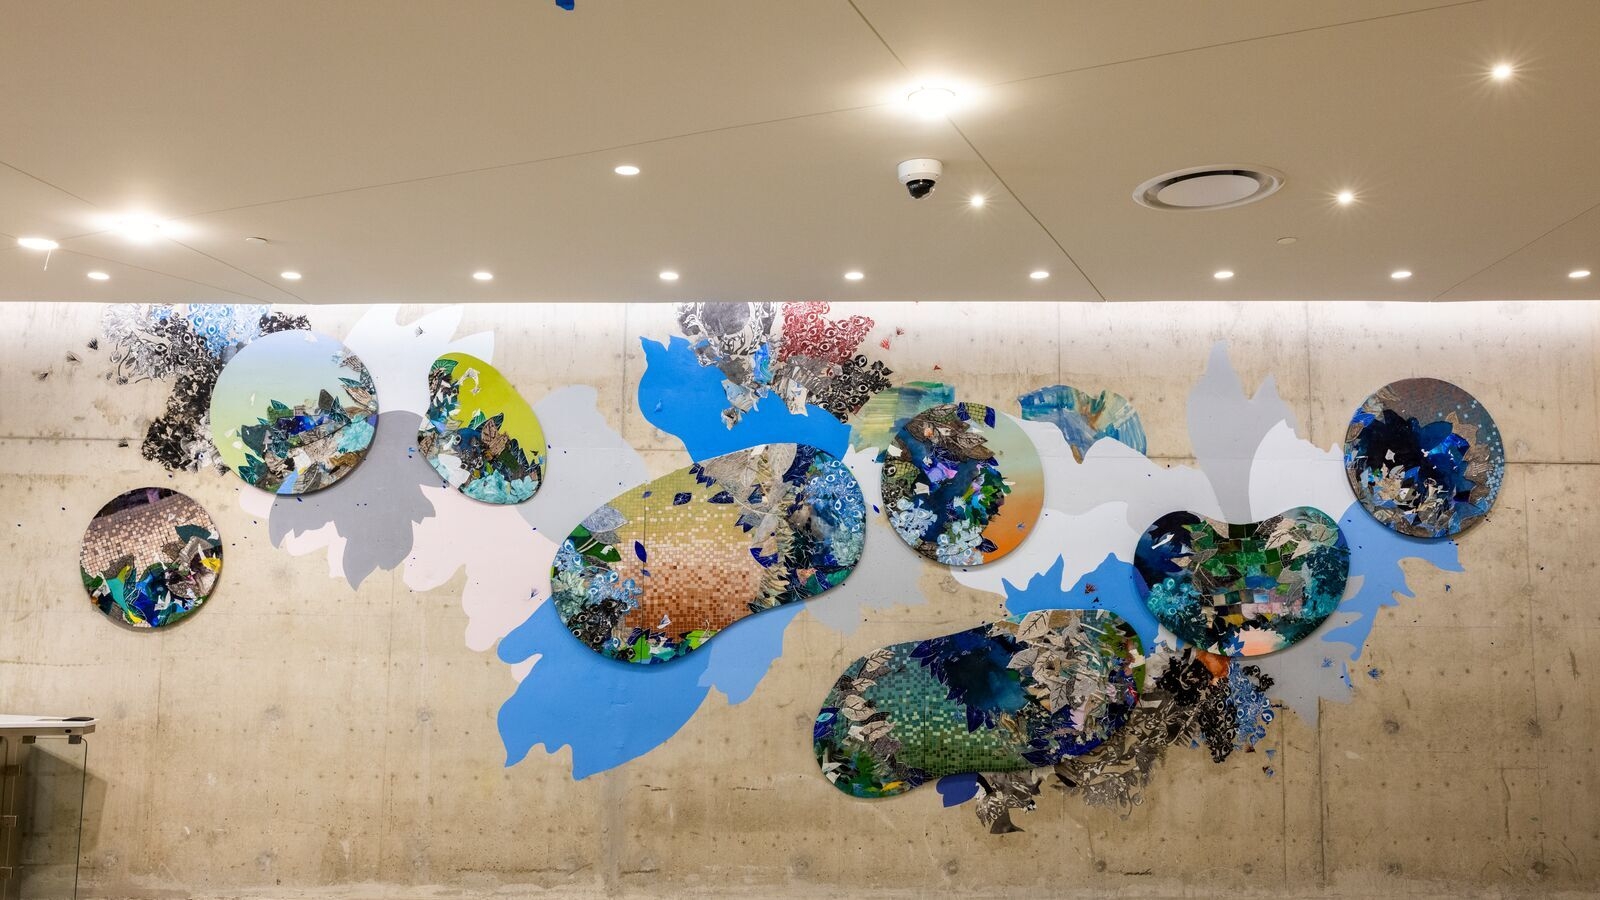 An image of an art installation at Amazon's second headquarters in Arlington, Virginia.